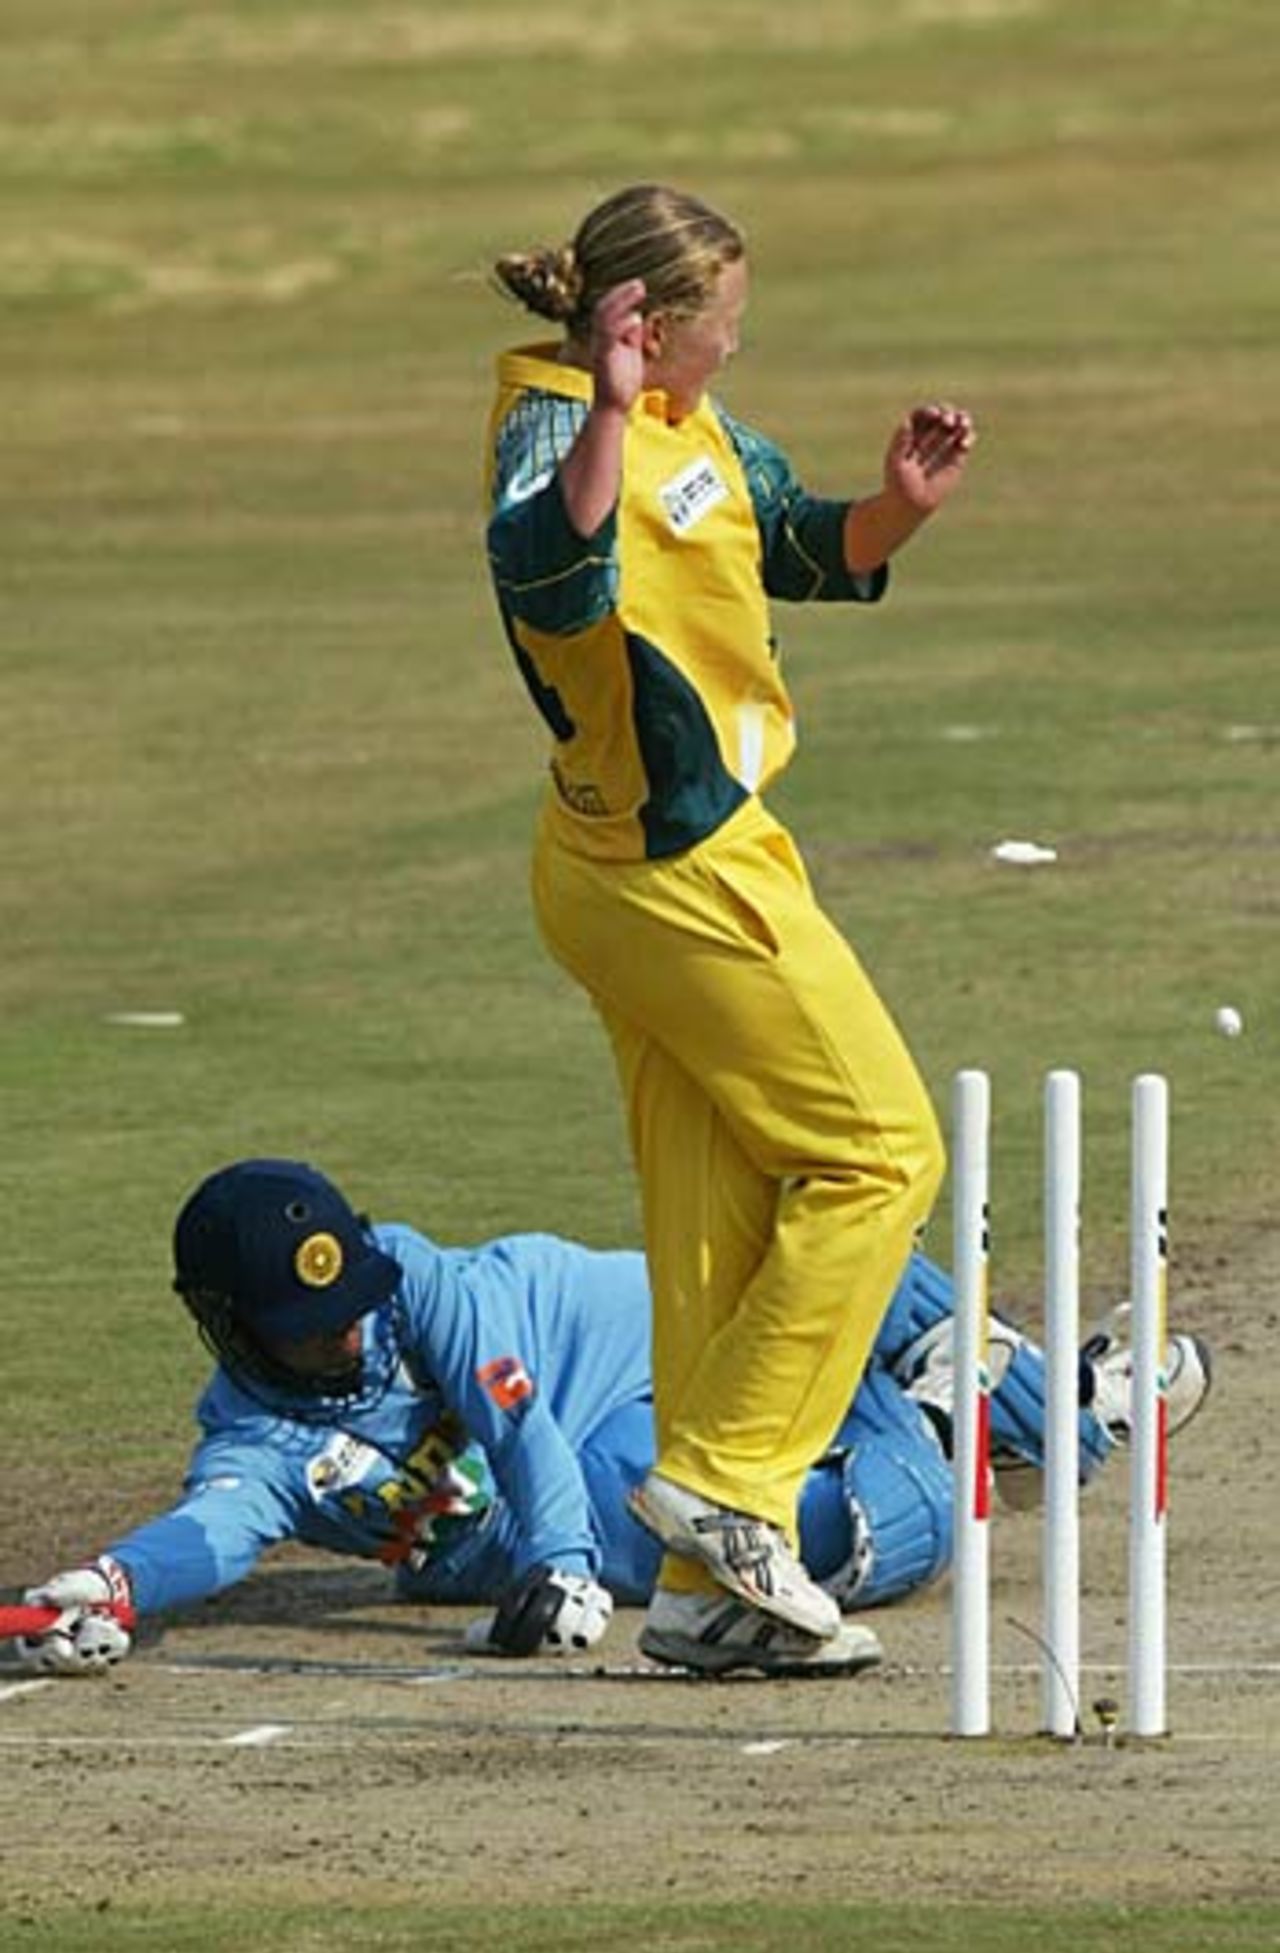 Anjum Chopra is run out by a throw from Julie Hayes, Australia v India, Women's World Cup final, Centurion, April 10, 2005